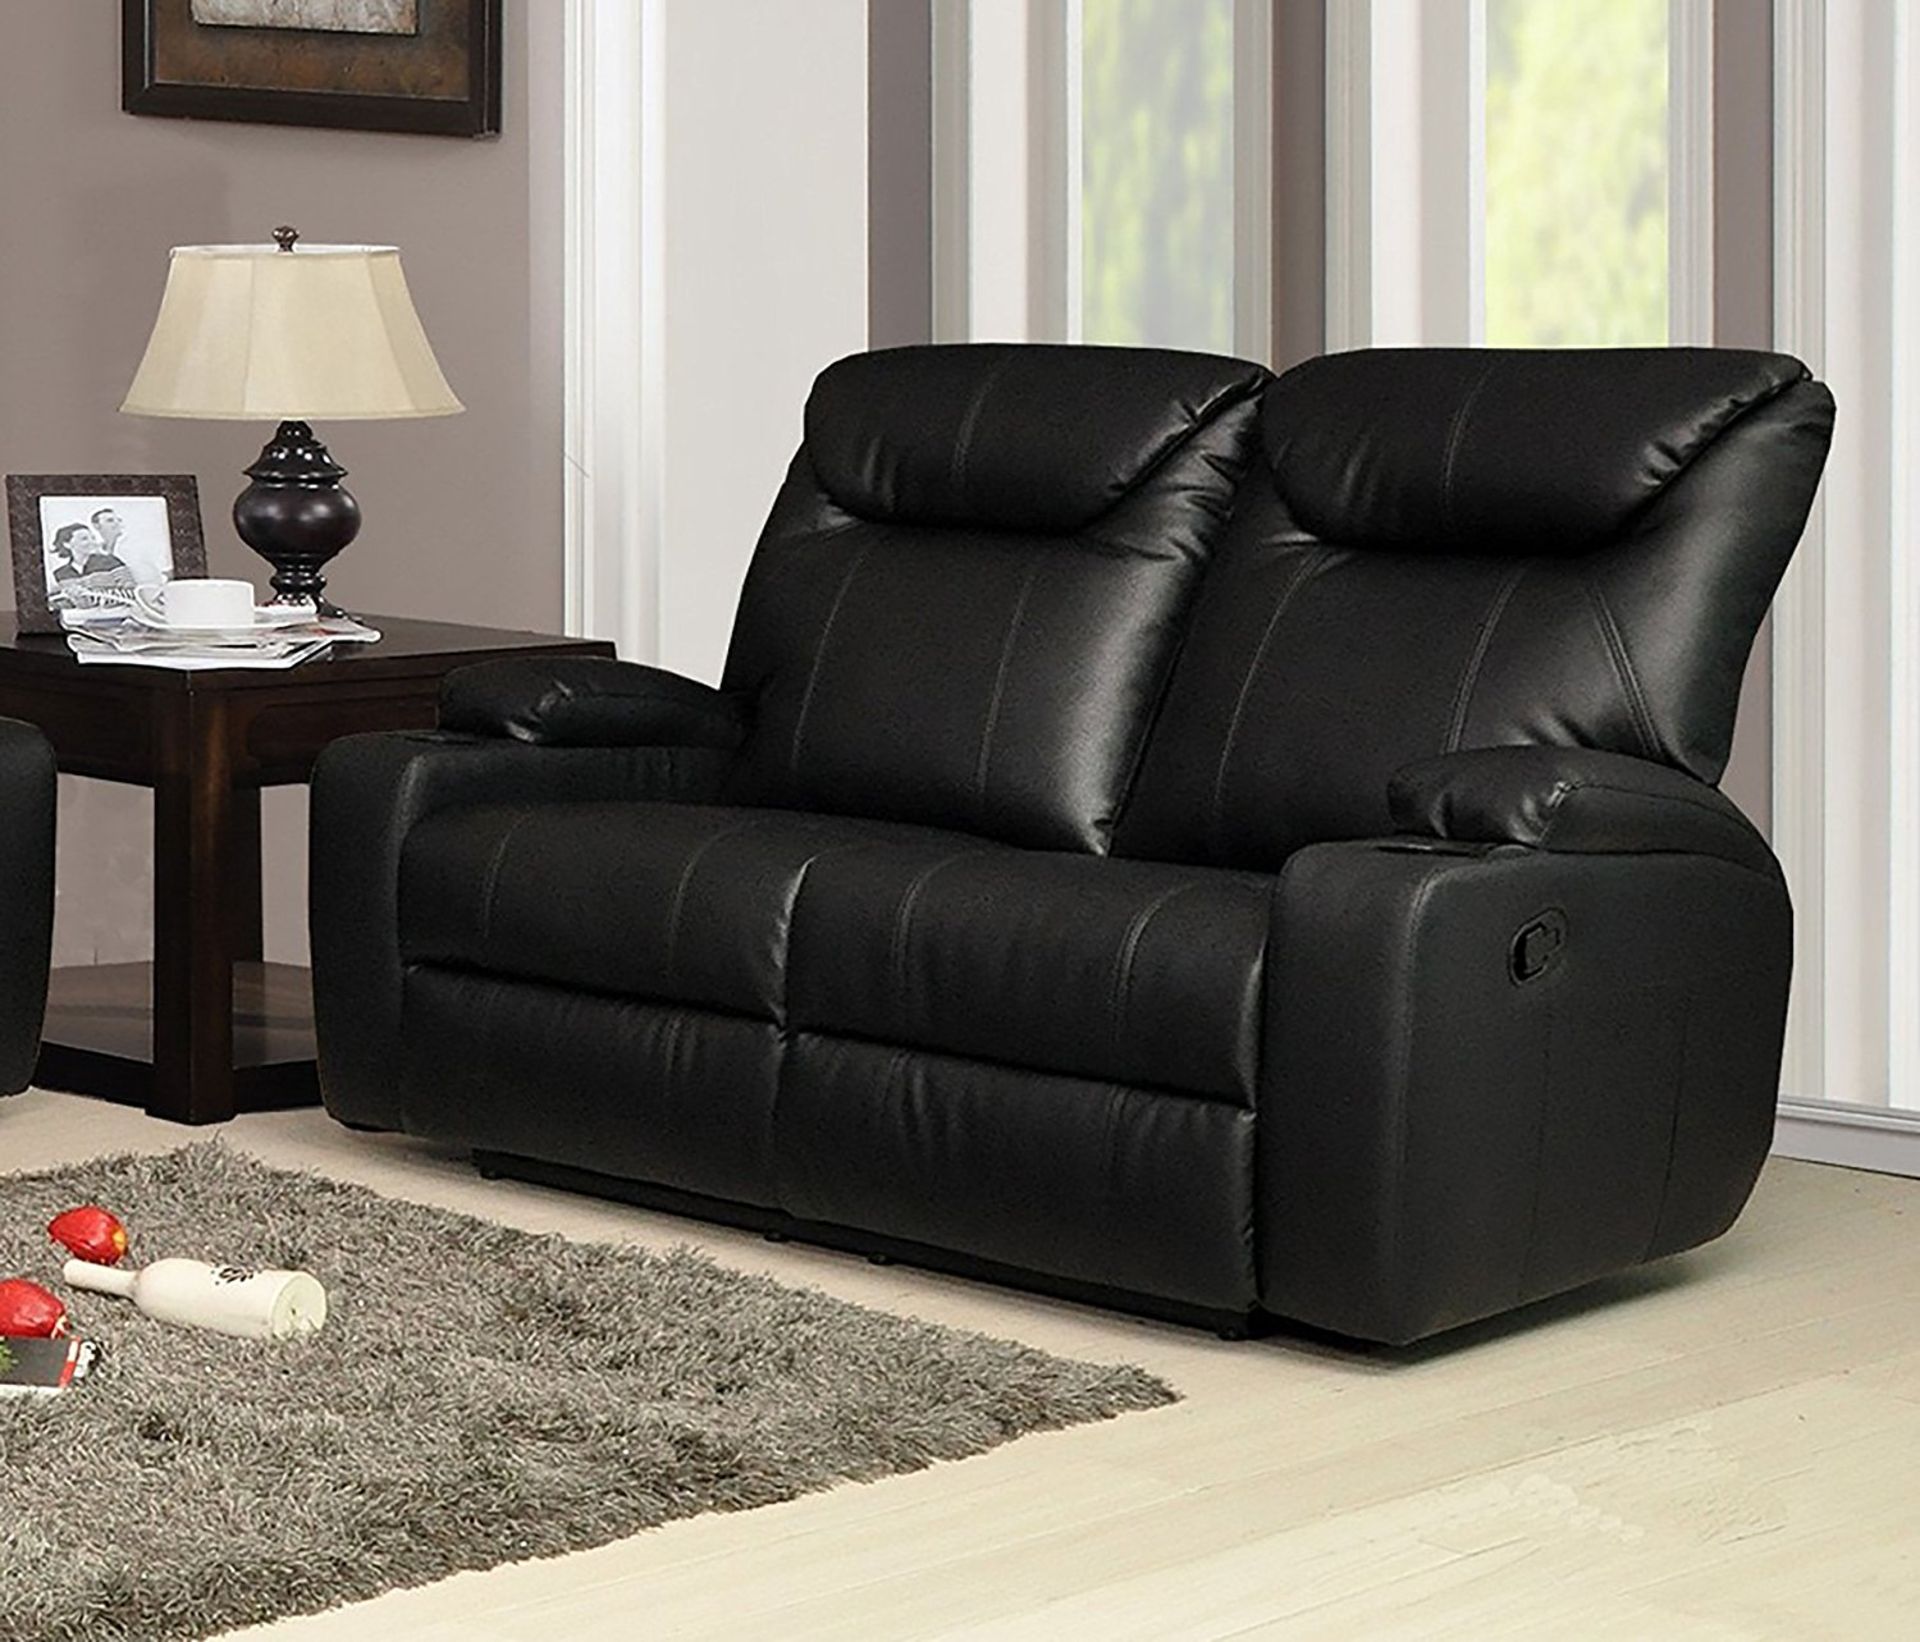 Brand New Boxed 3 Seater Plus 2 Seater Lazyboy Black Leather Electric Reclining Sofas - Image 3 of 3